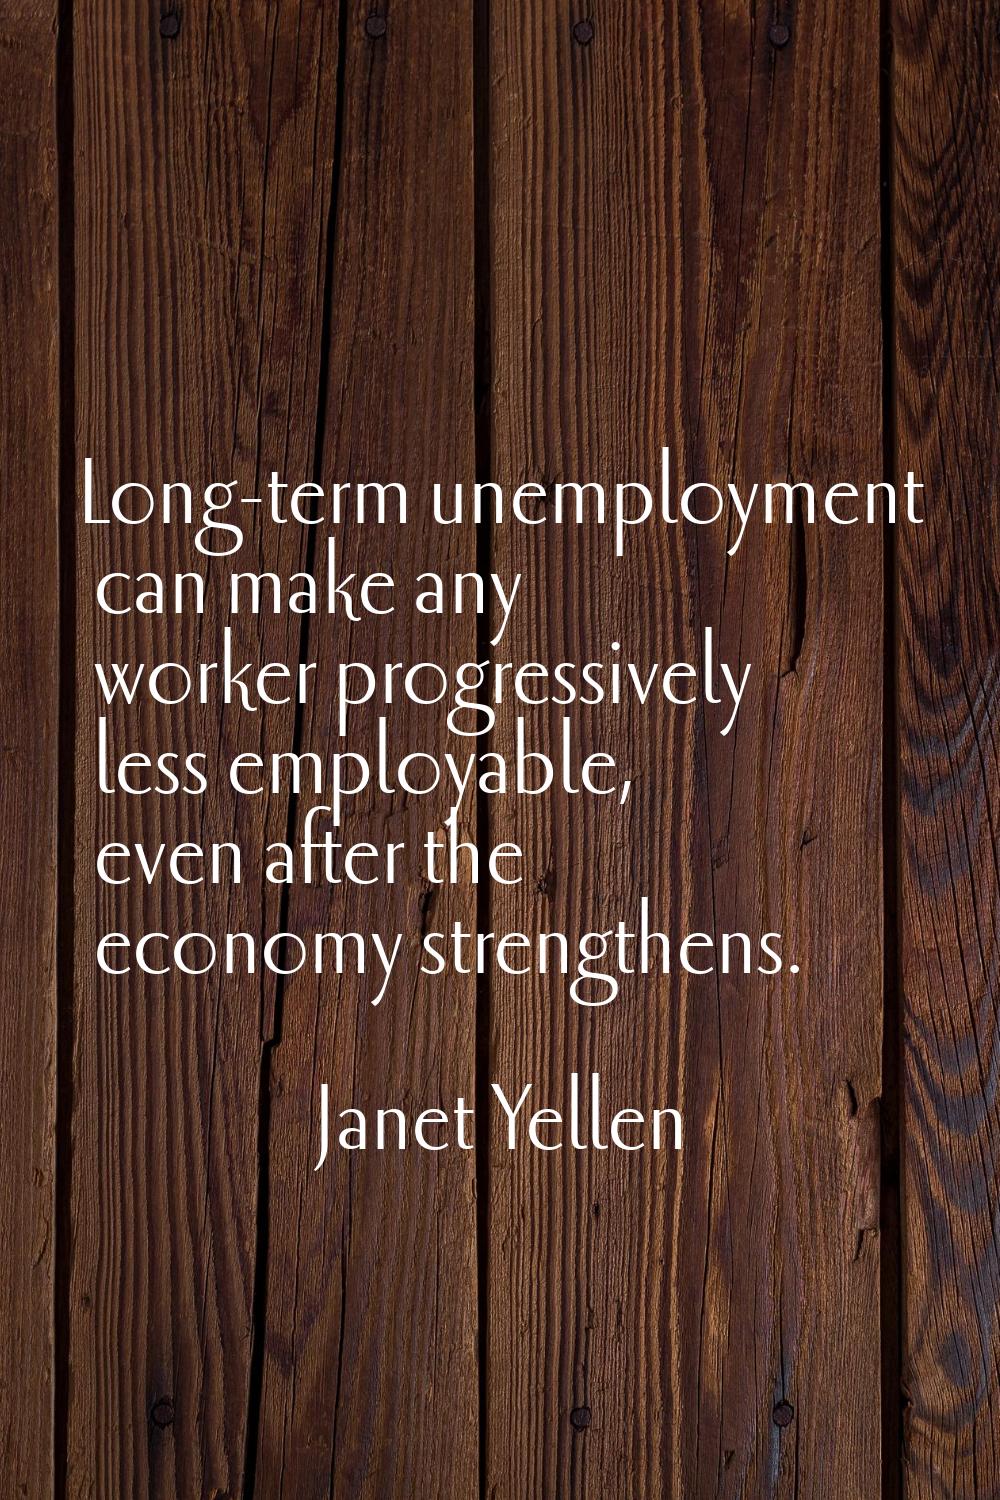 Long-term unemployment can make any worker progressively less employable, even after the economy st